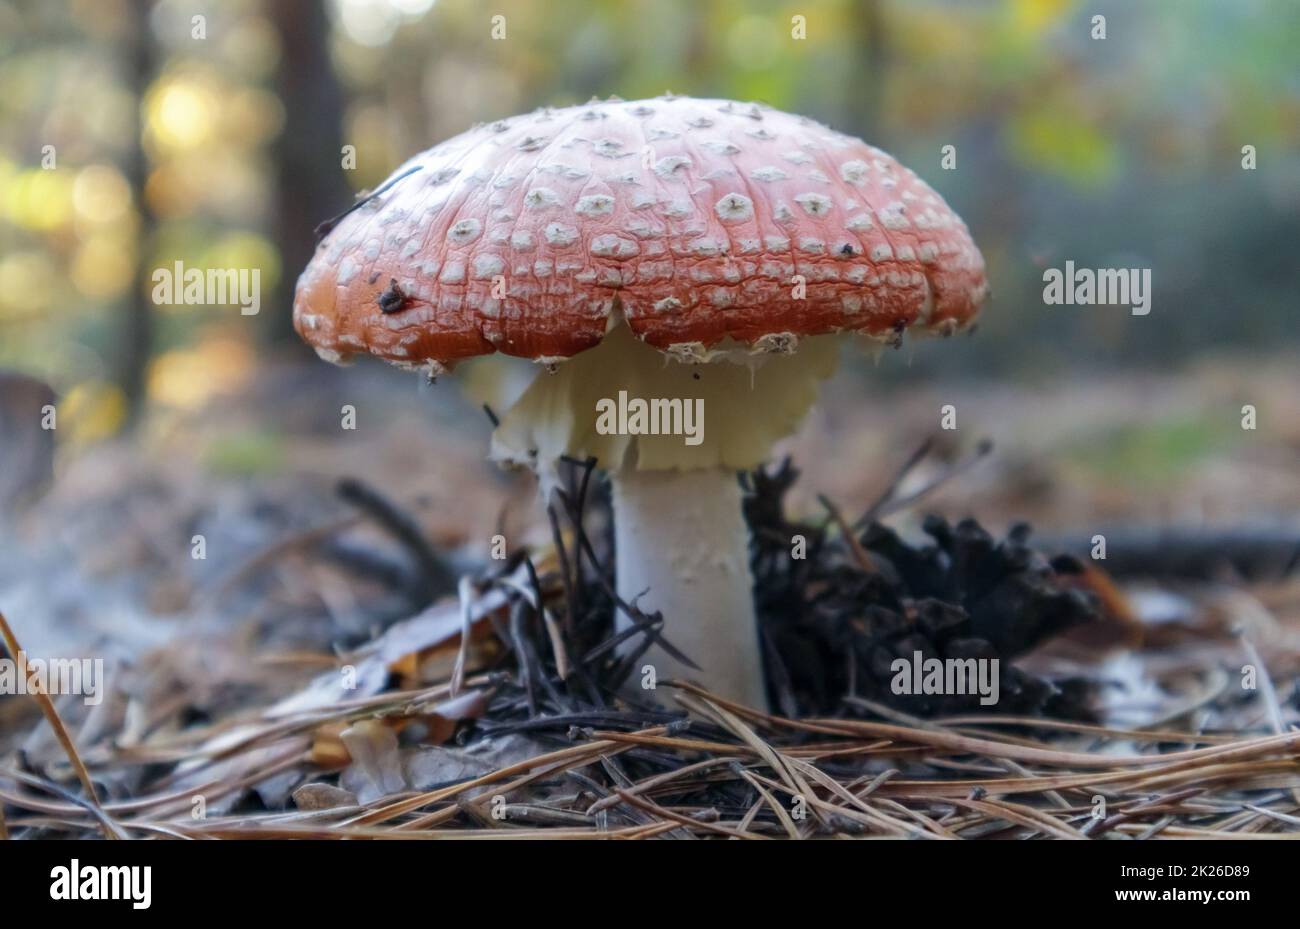 Red fly agaric or toadstool in the grass. Amanita muscaria. Toxic and poisonous mushroom muscimol. The photo was taken against the background of a natural forest. Forest mushrooms. Stock Photo